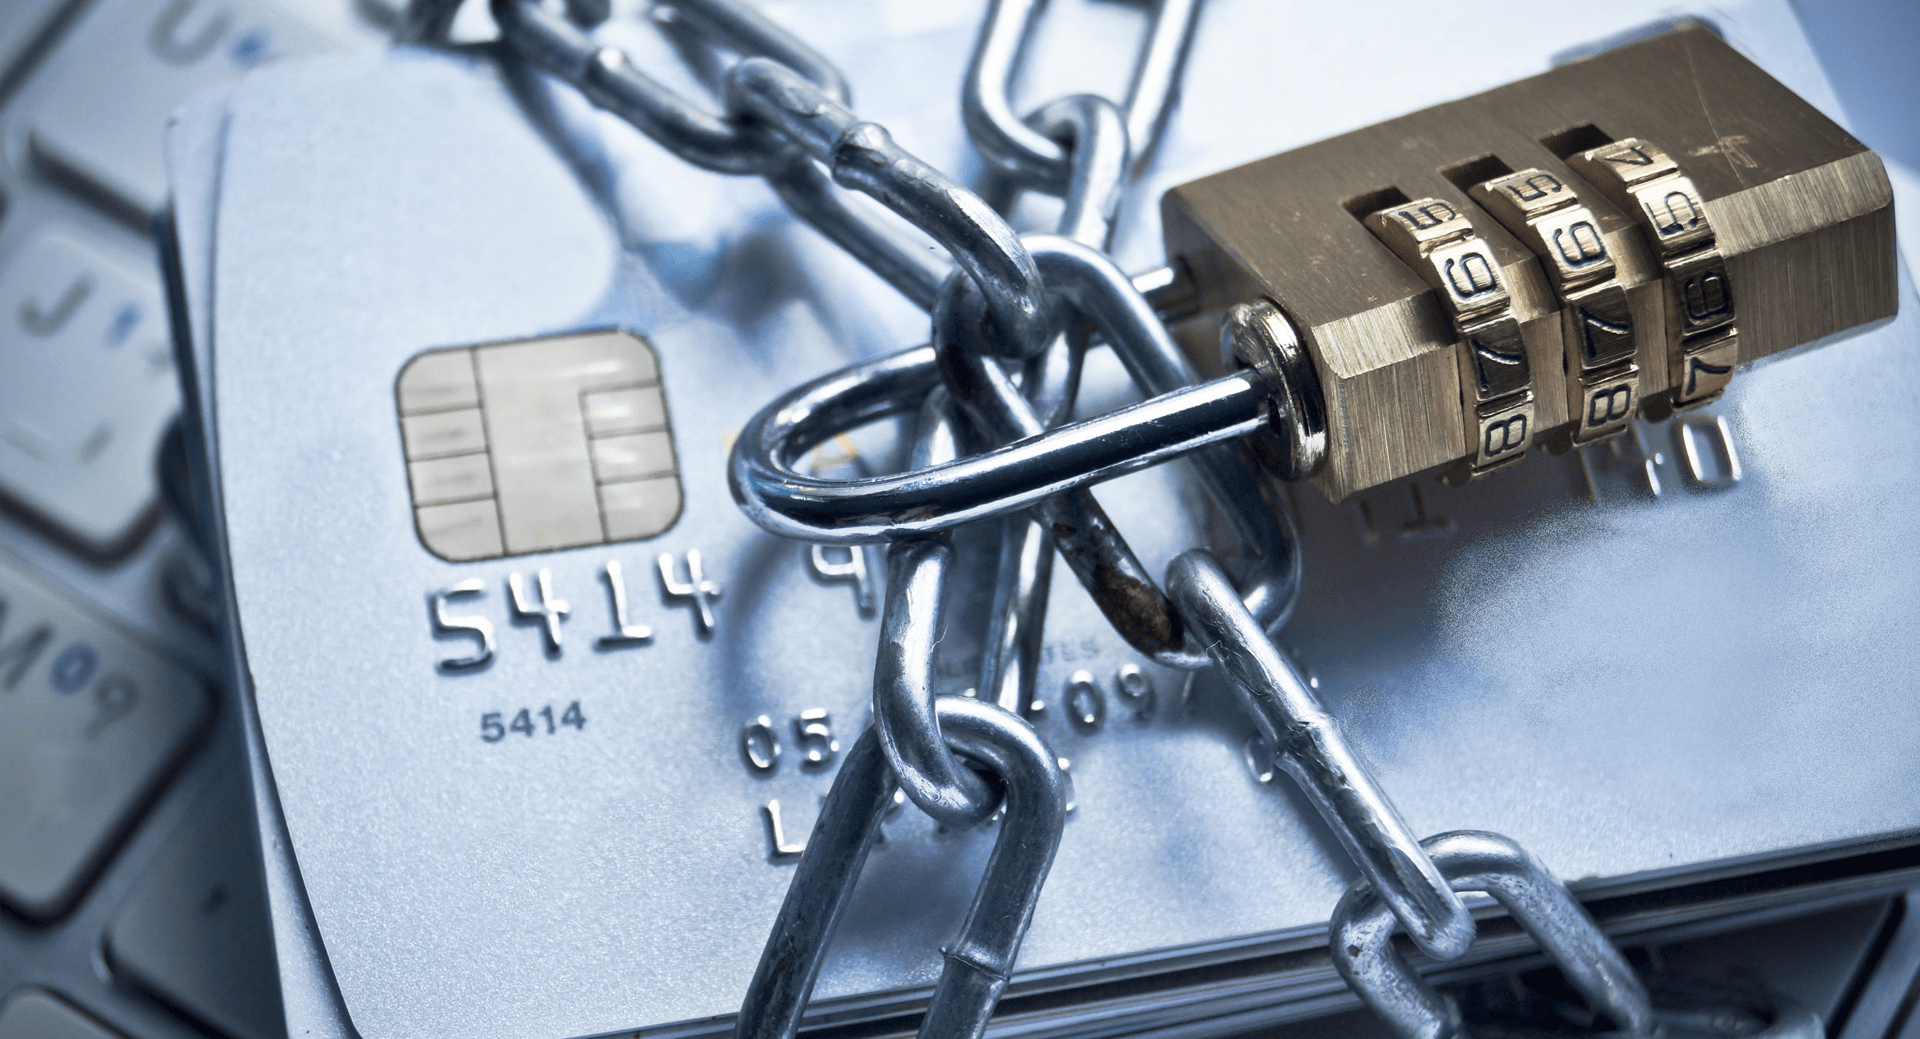 Guest Post: Demystifying PCI DSS